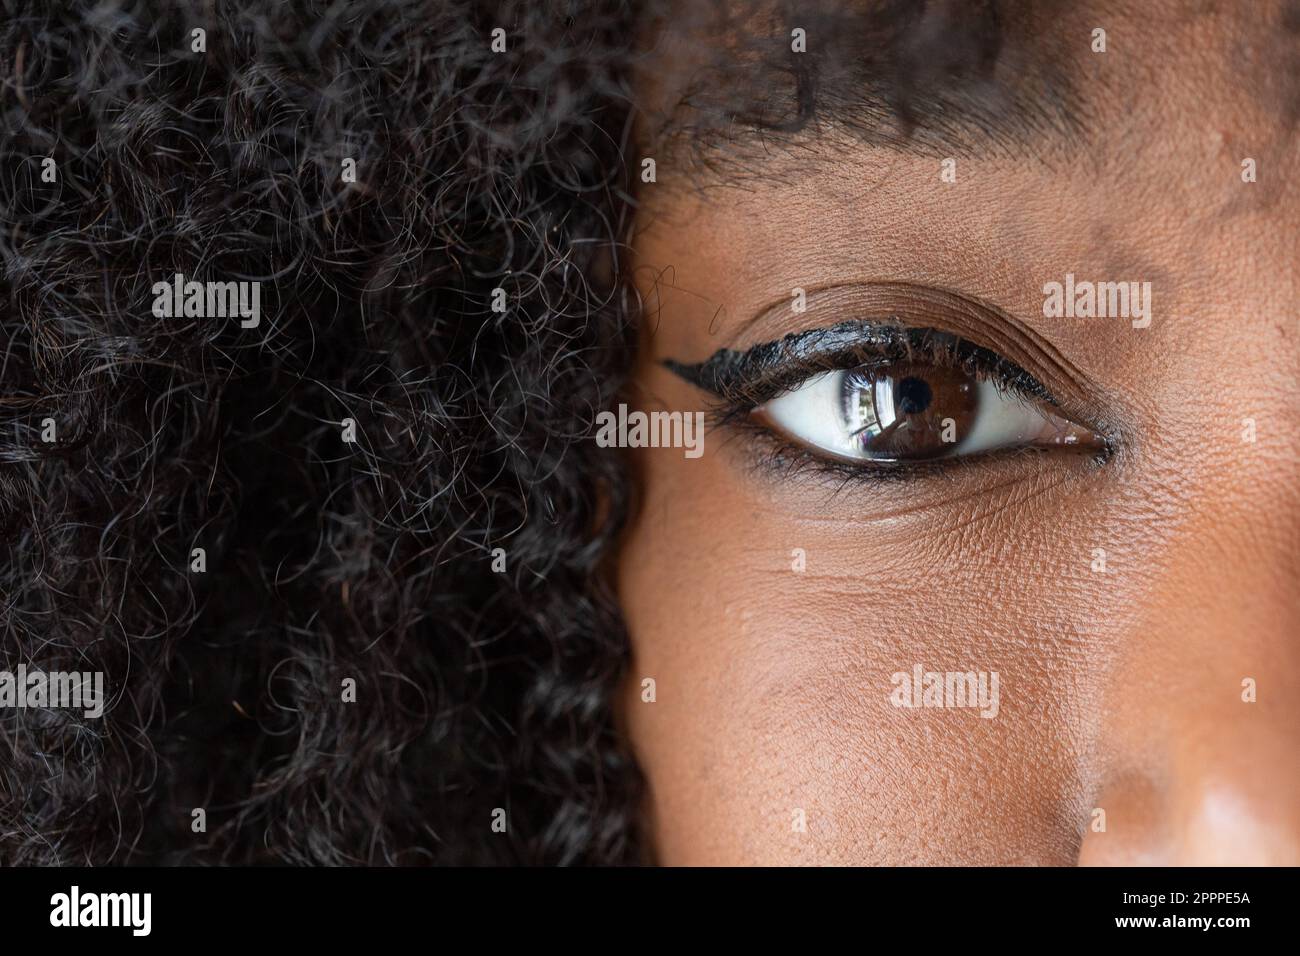 Macro of the human eye of an African woman wearing makeup with an afro hairstyle. Large black copy space on the hair and eye details with eyelashes an Stock Photo